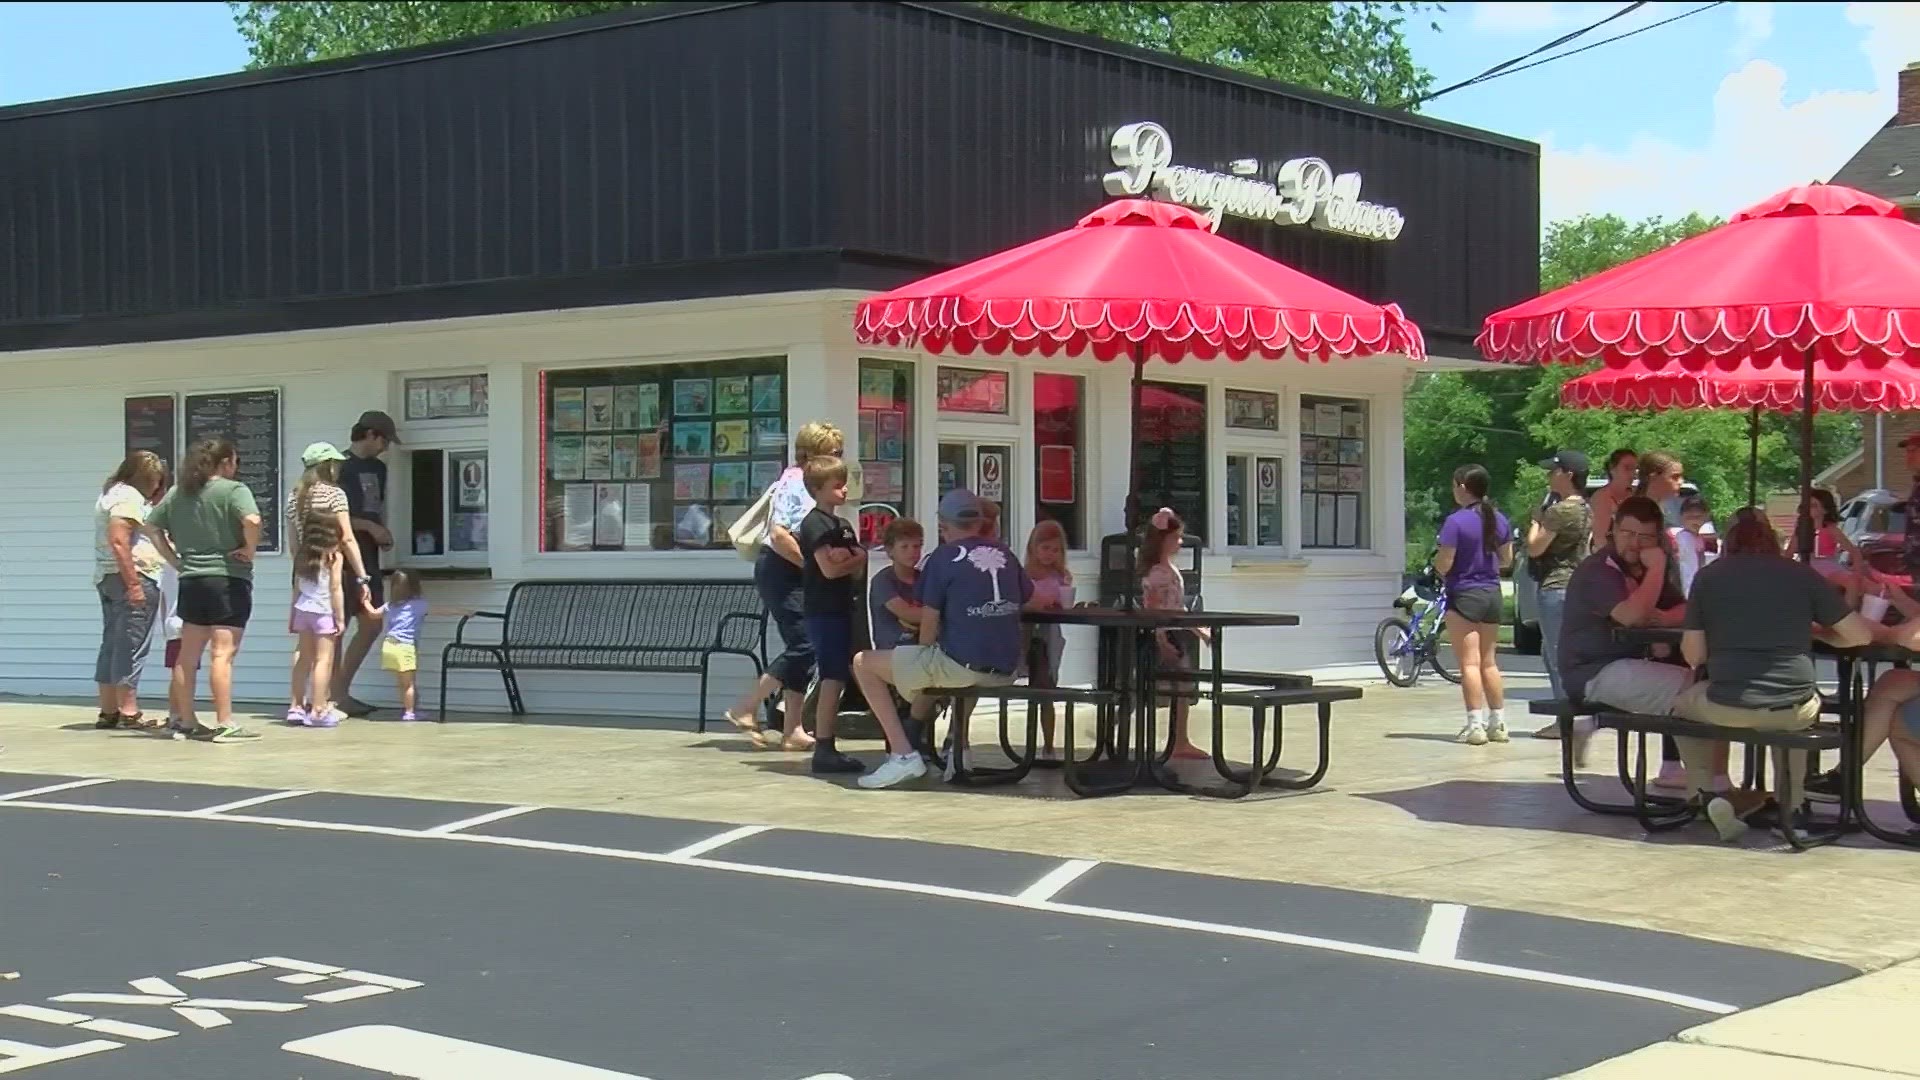 A storm ripped off the roof of Penguin Palace 3 months ago. Hundreds of people stood in line for a scoop of ice cream at the reopening of the popular spot in Maumee.